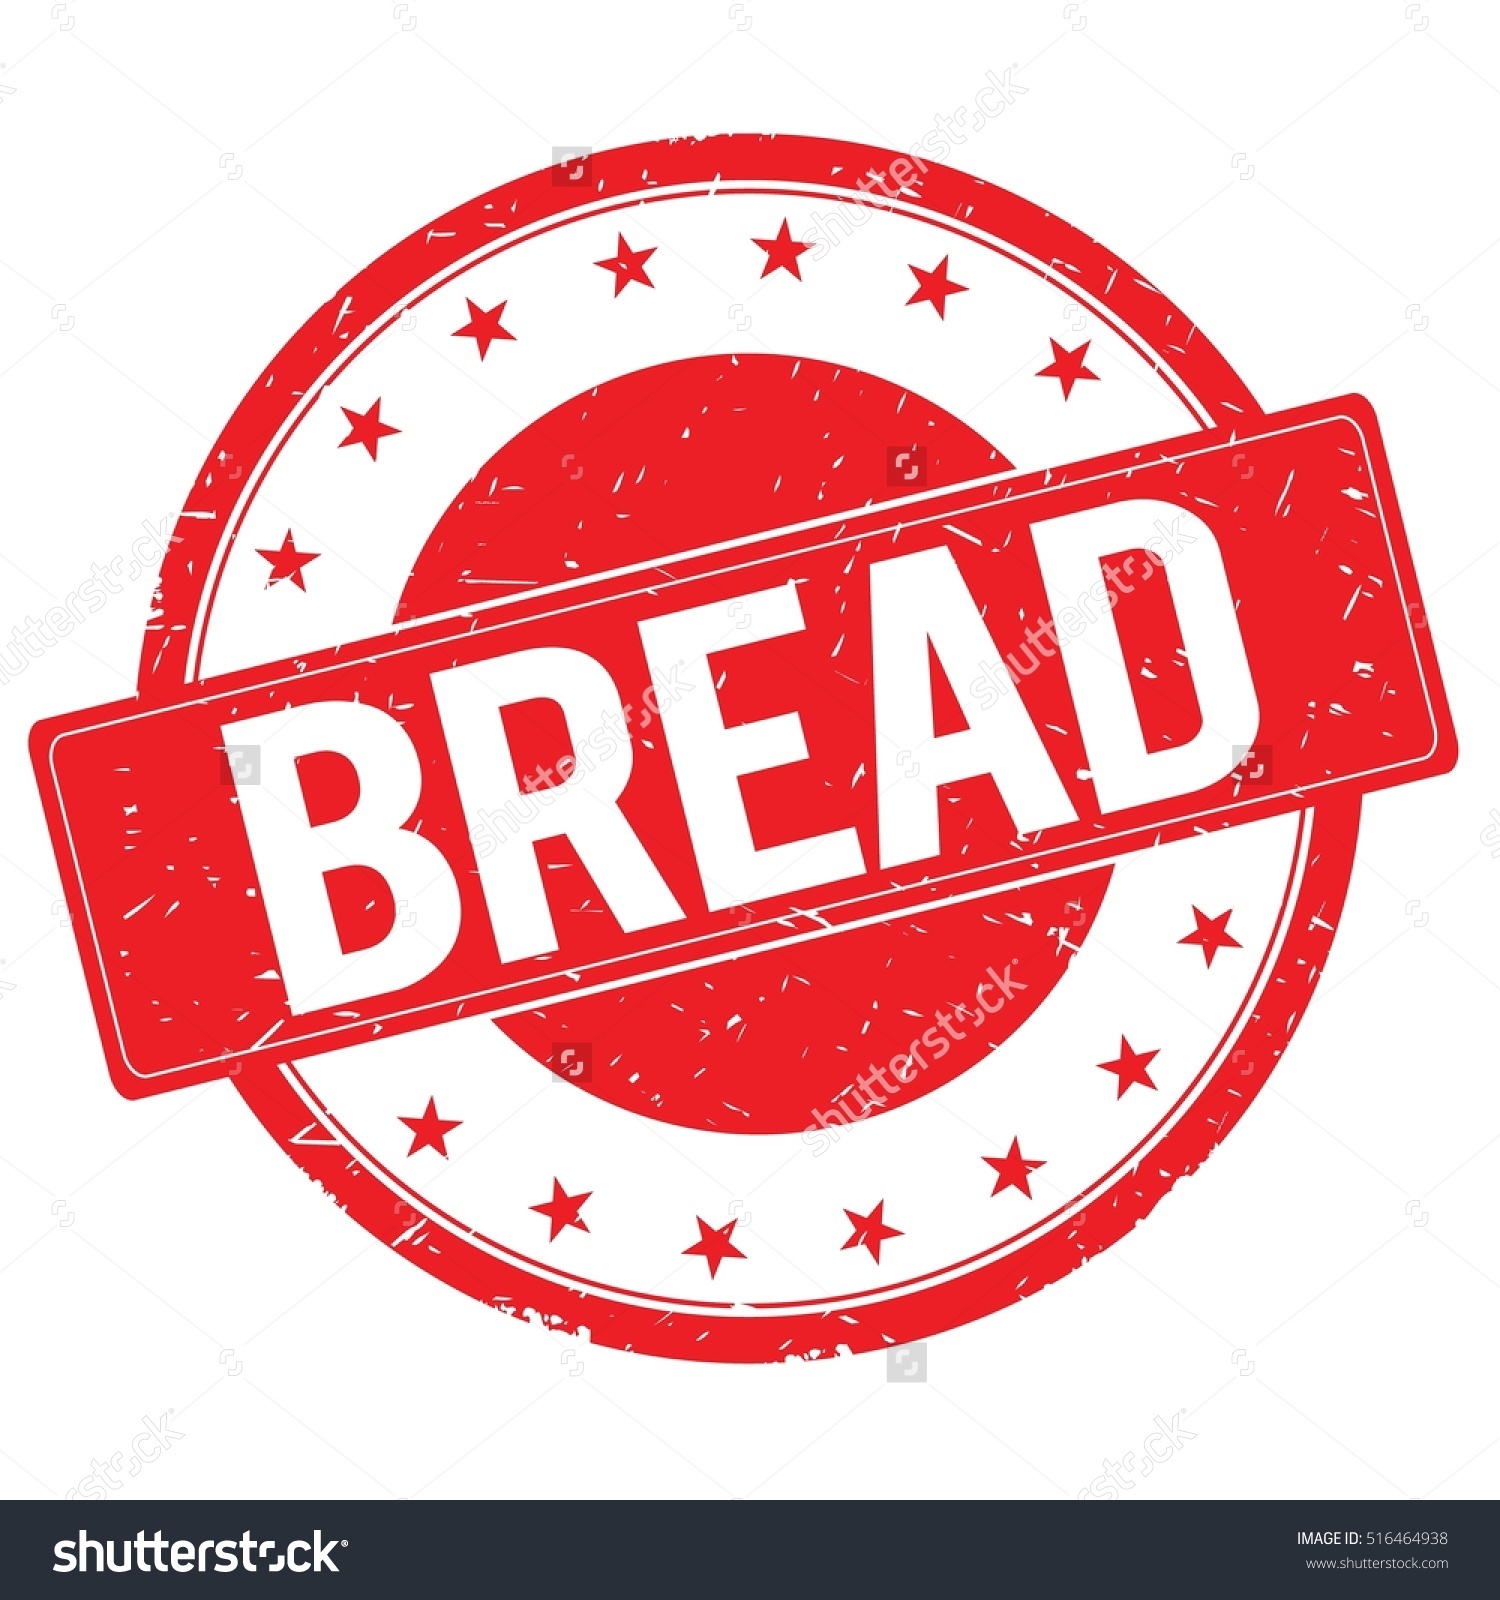 Bread Stamp Sign Text Word Logo Stock Illustration 516464938.